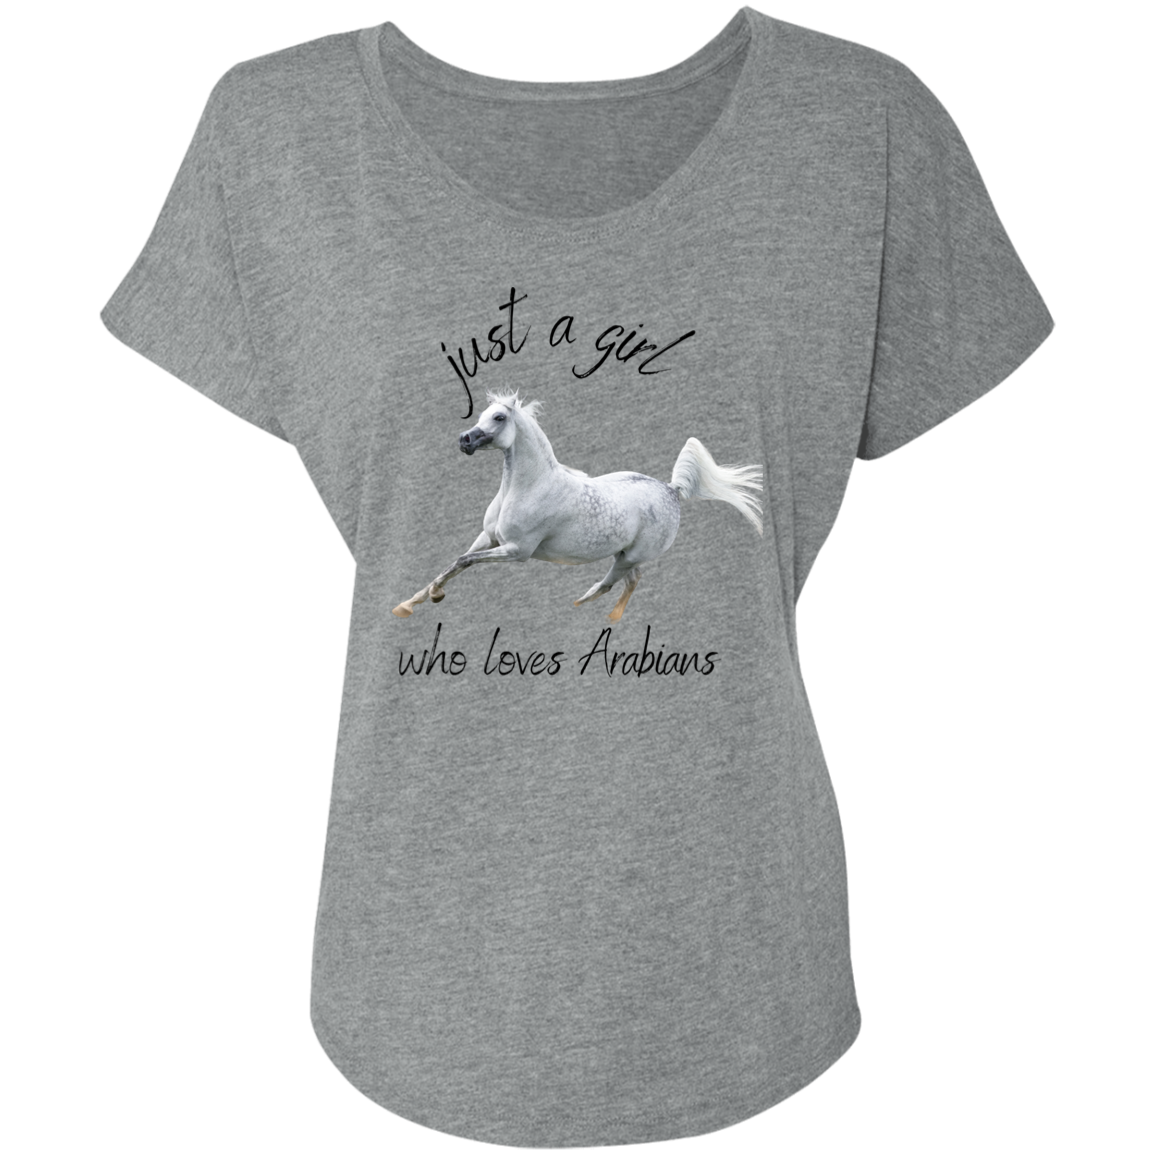 Just A Girl Who Loves Arabians, Ladies T-Shirt, Gift - MyAllOutHorses